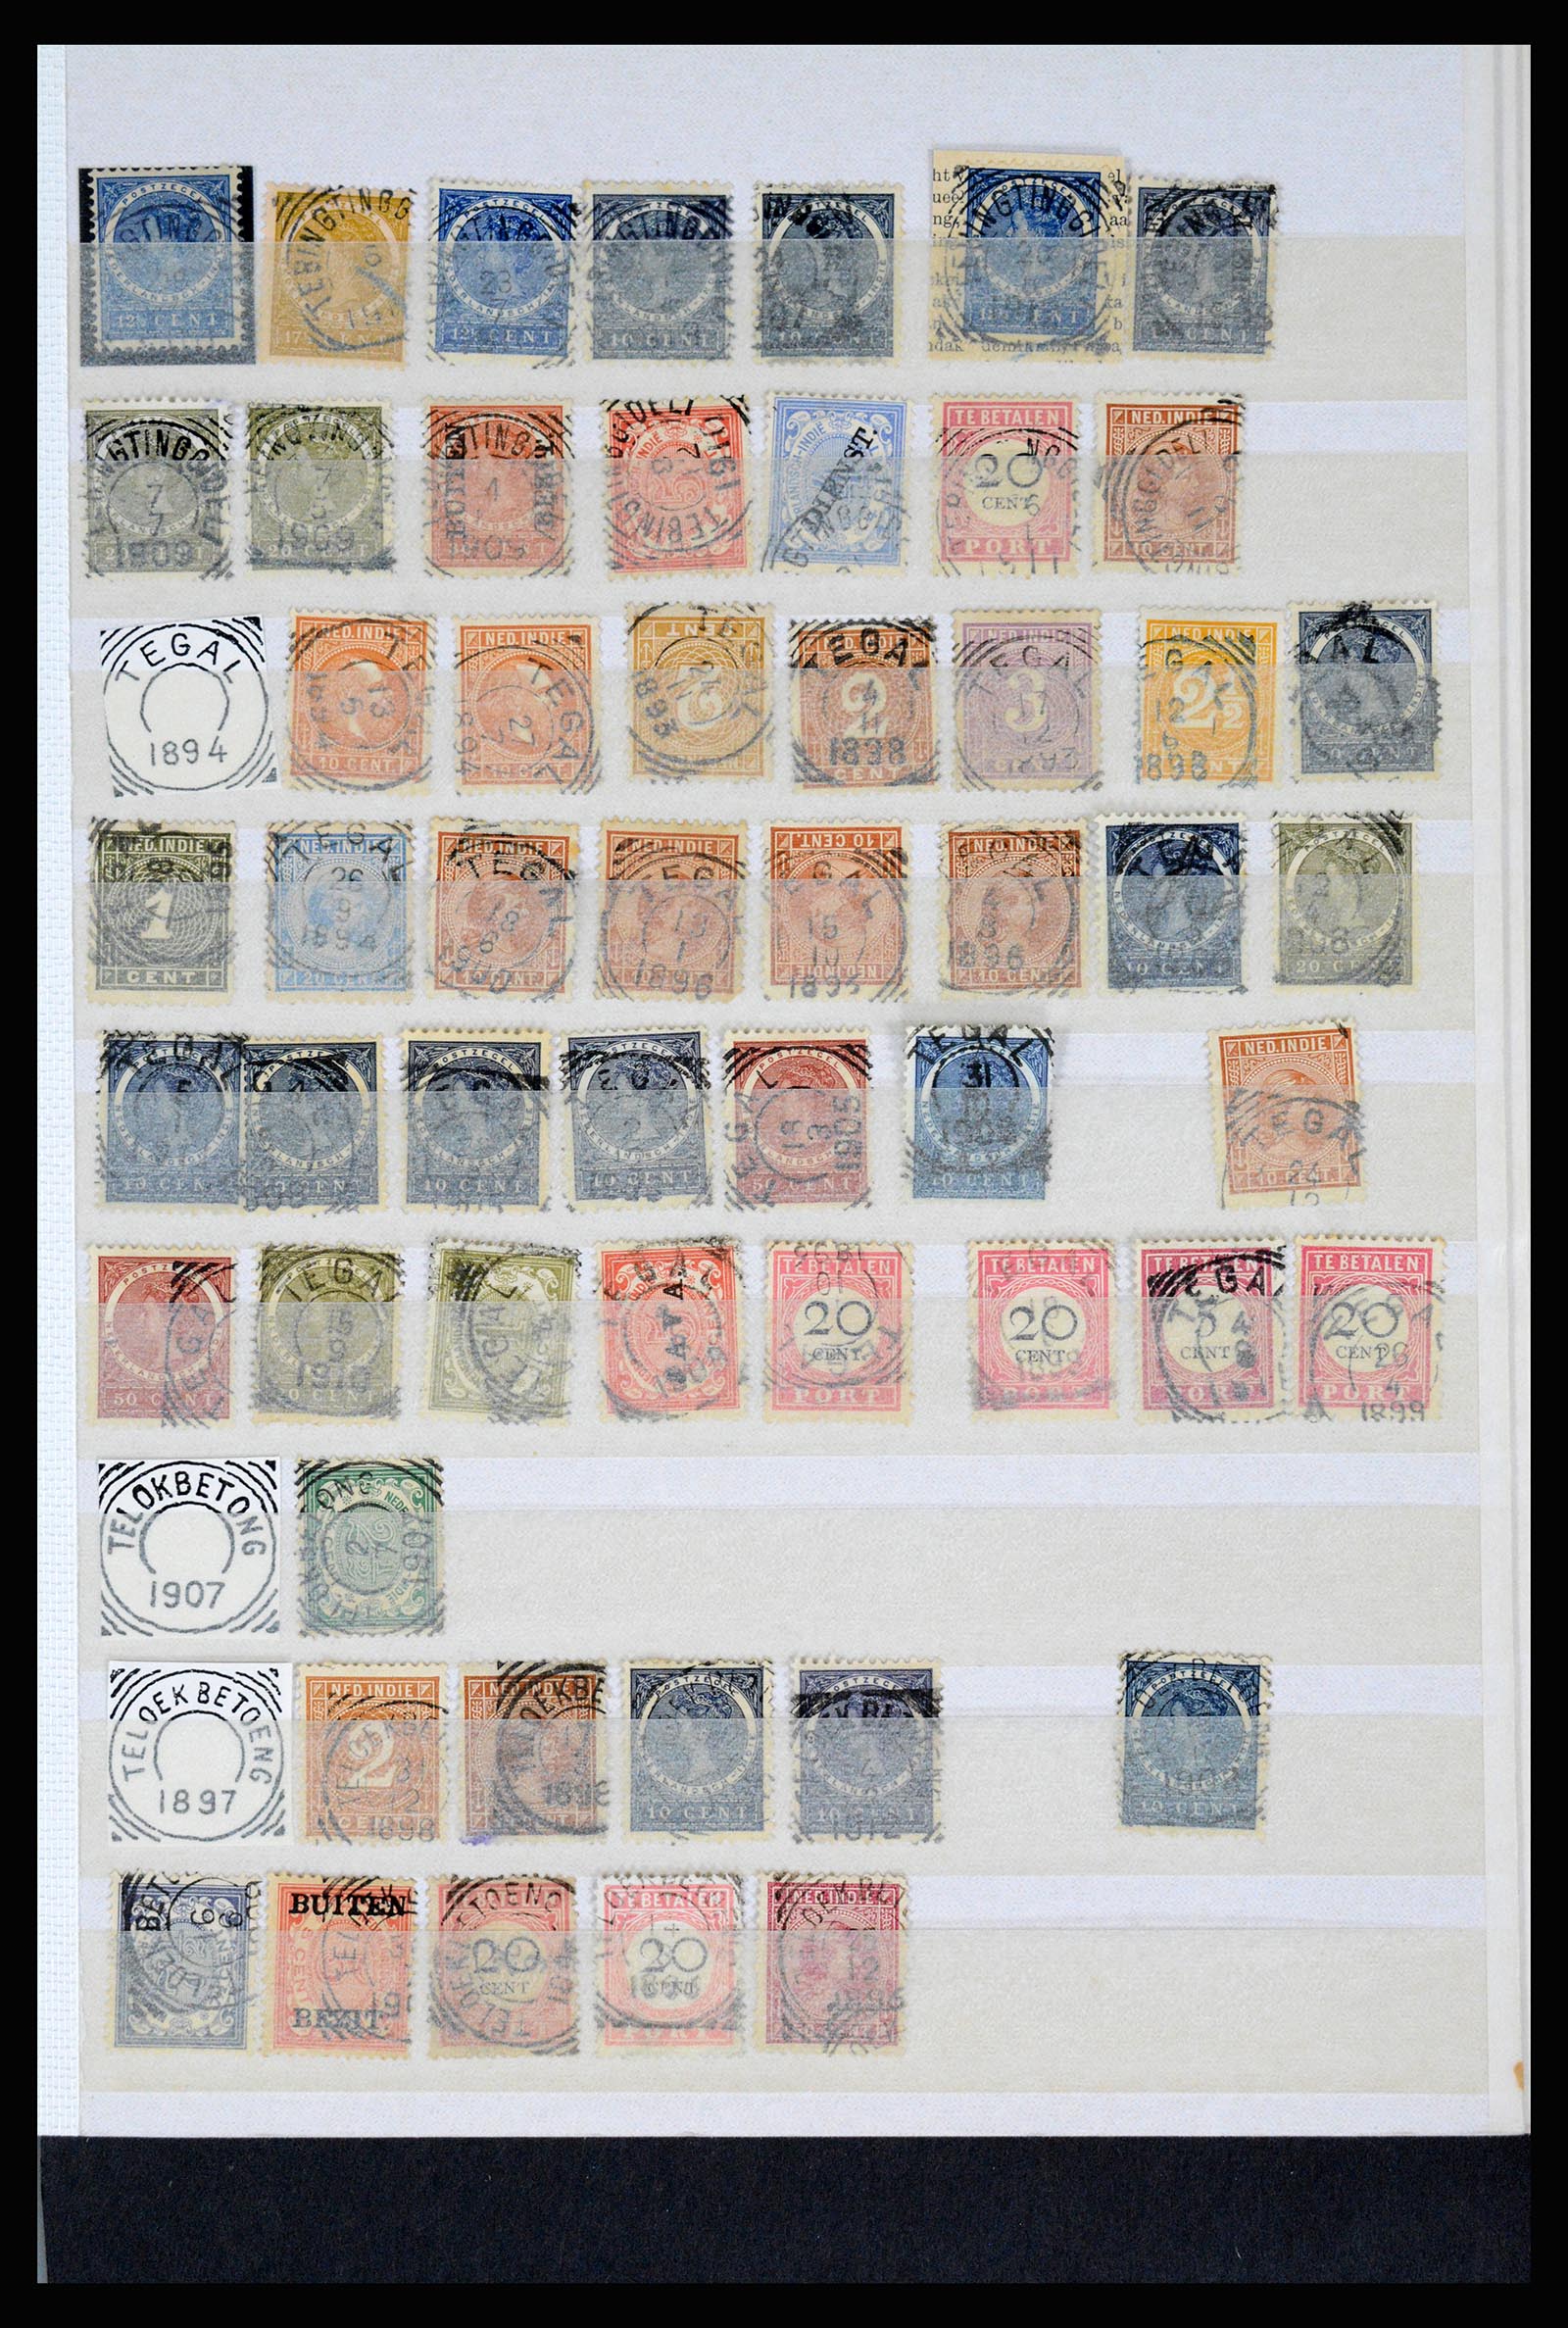 36839 096 - Stamp collection 36839 Dutch east Indies square cancels.